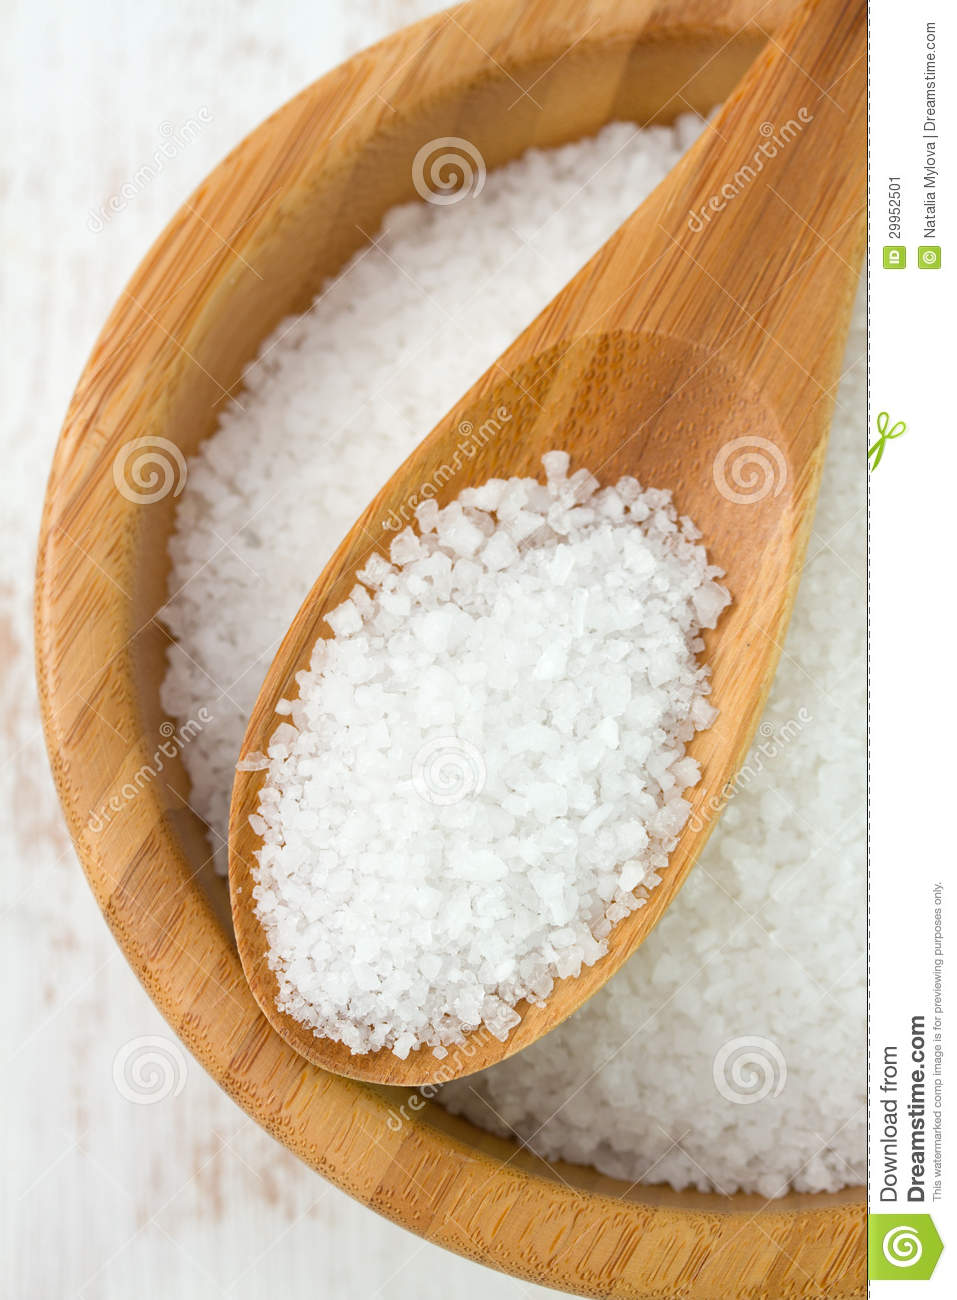 Salt In Bowl With Spoon Stock Image   Image  29952501